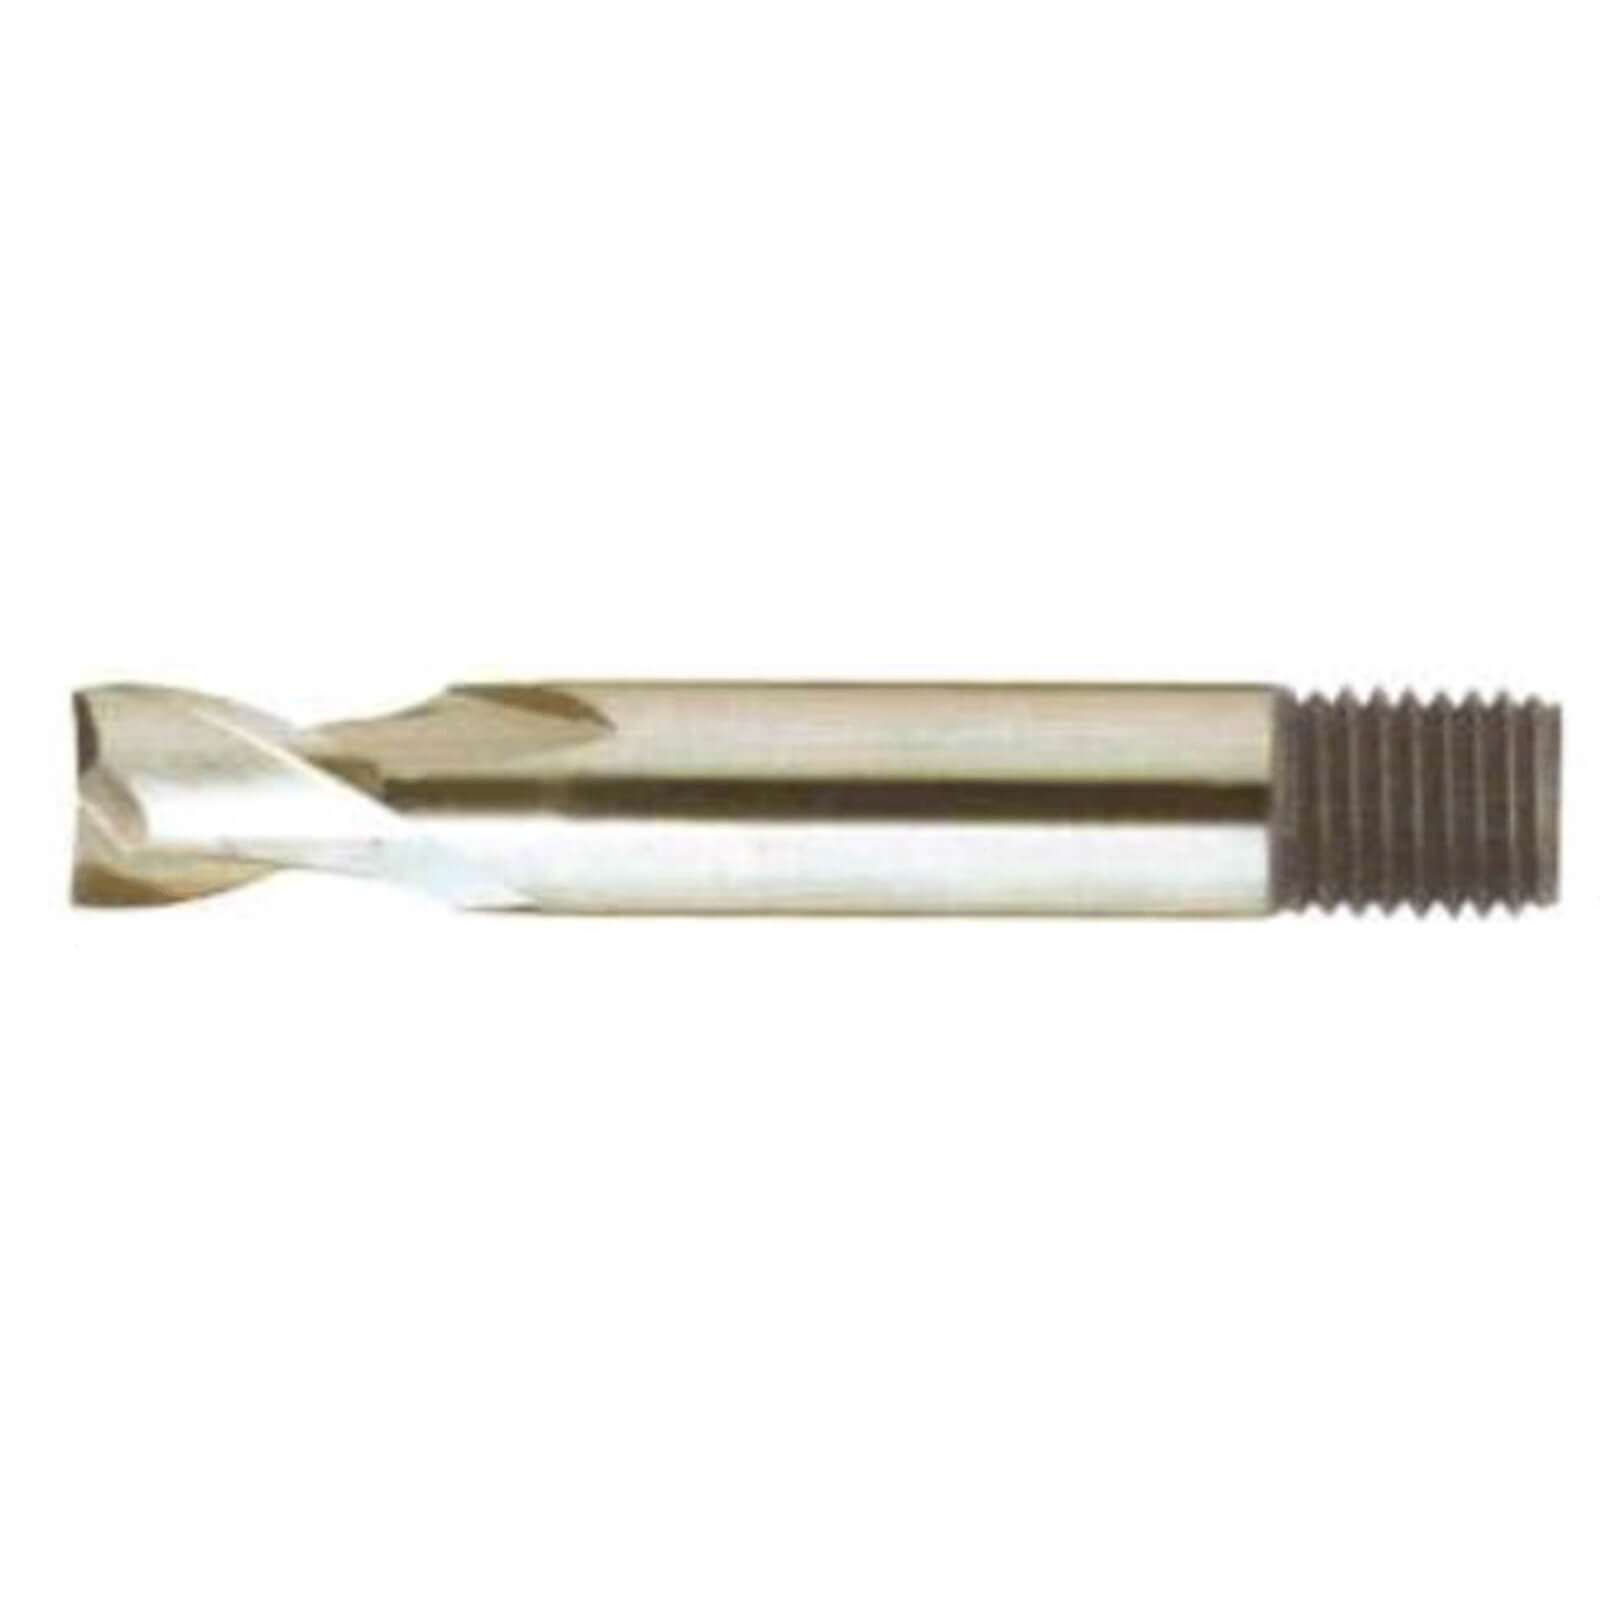 Image of Clarkson M42 2 Flute Screwed Shank Slot Drill 2.5mm